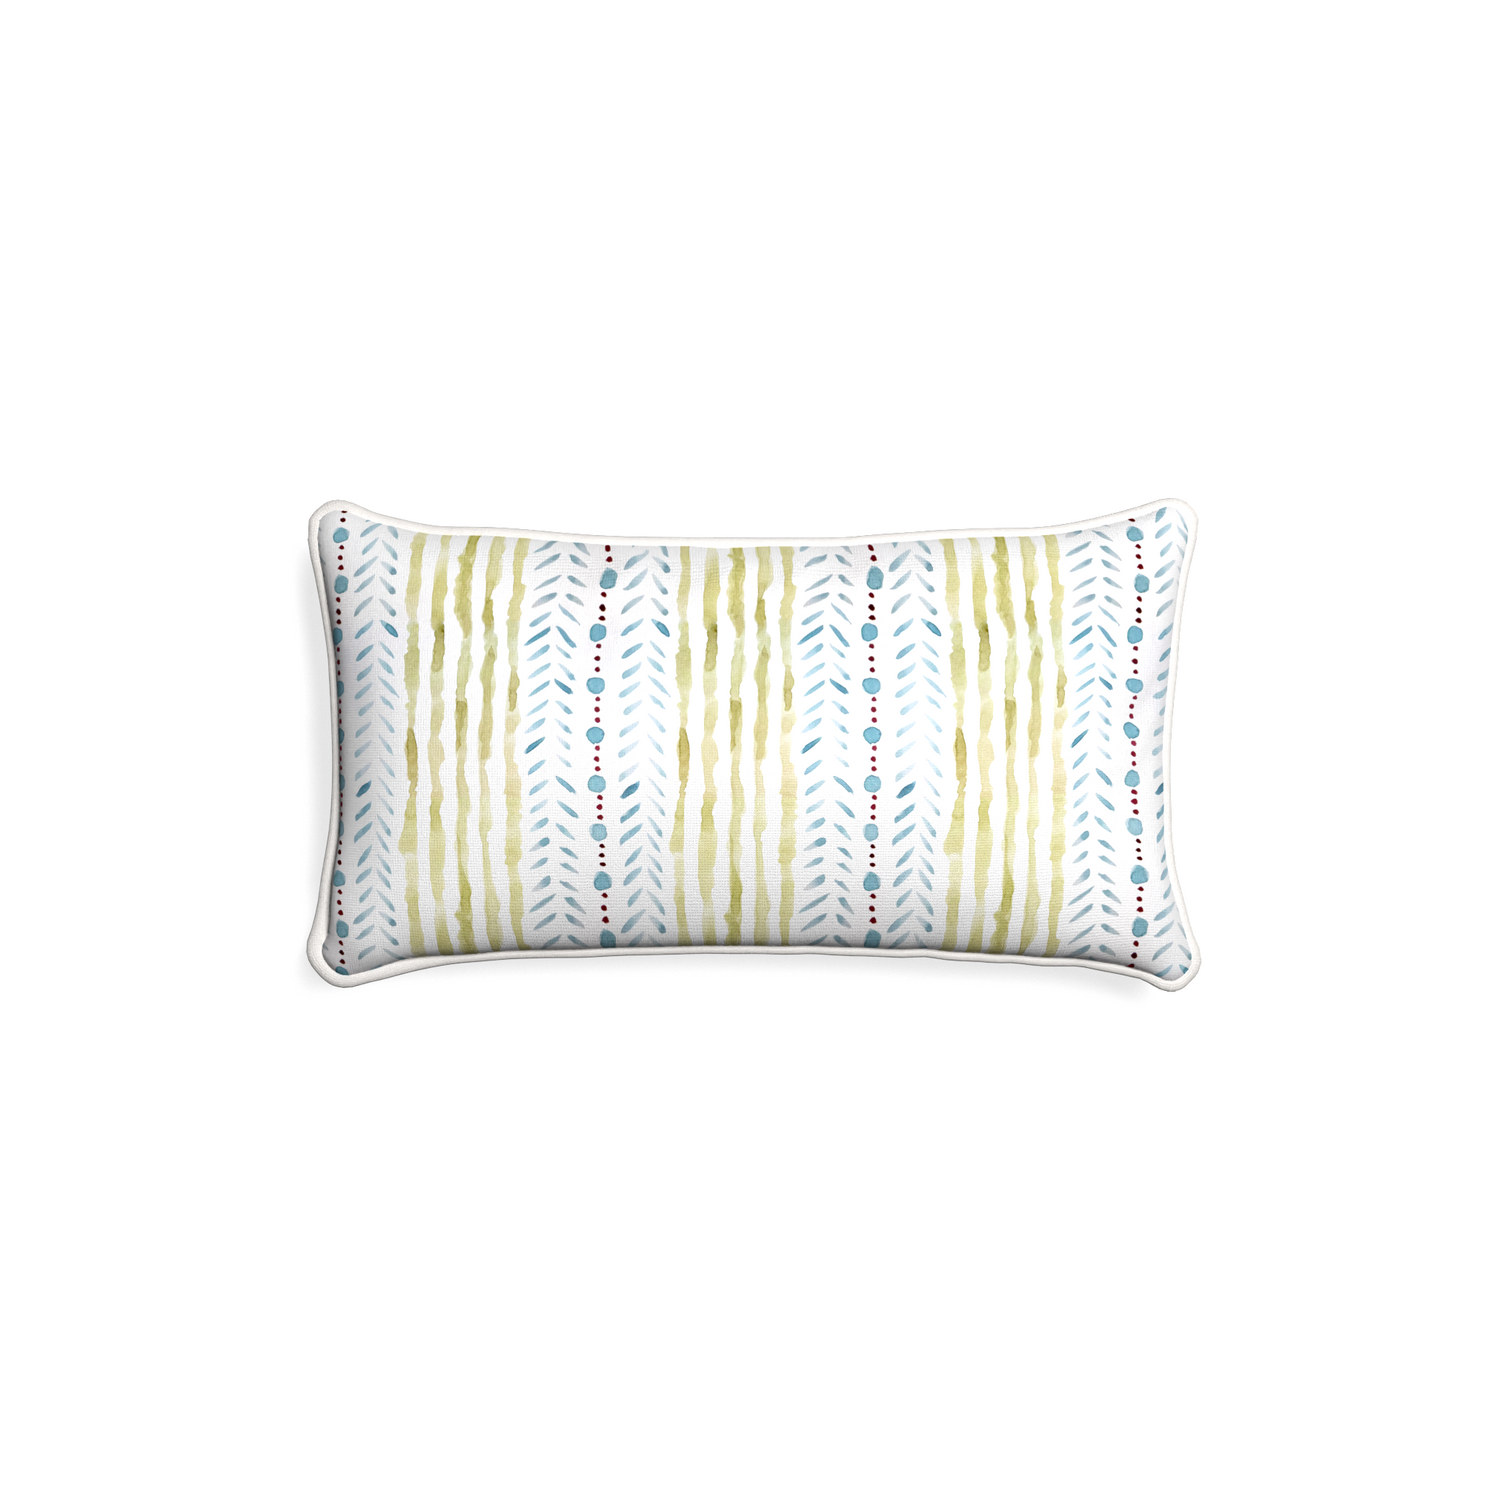 Petite-lumbar julia custom blue & green stripedpillow with snow piping on white background